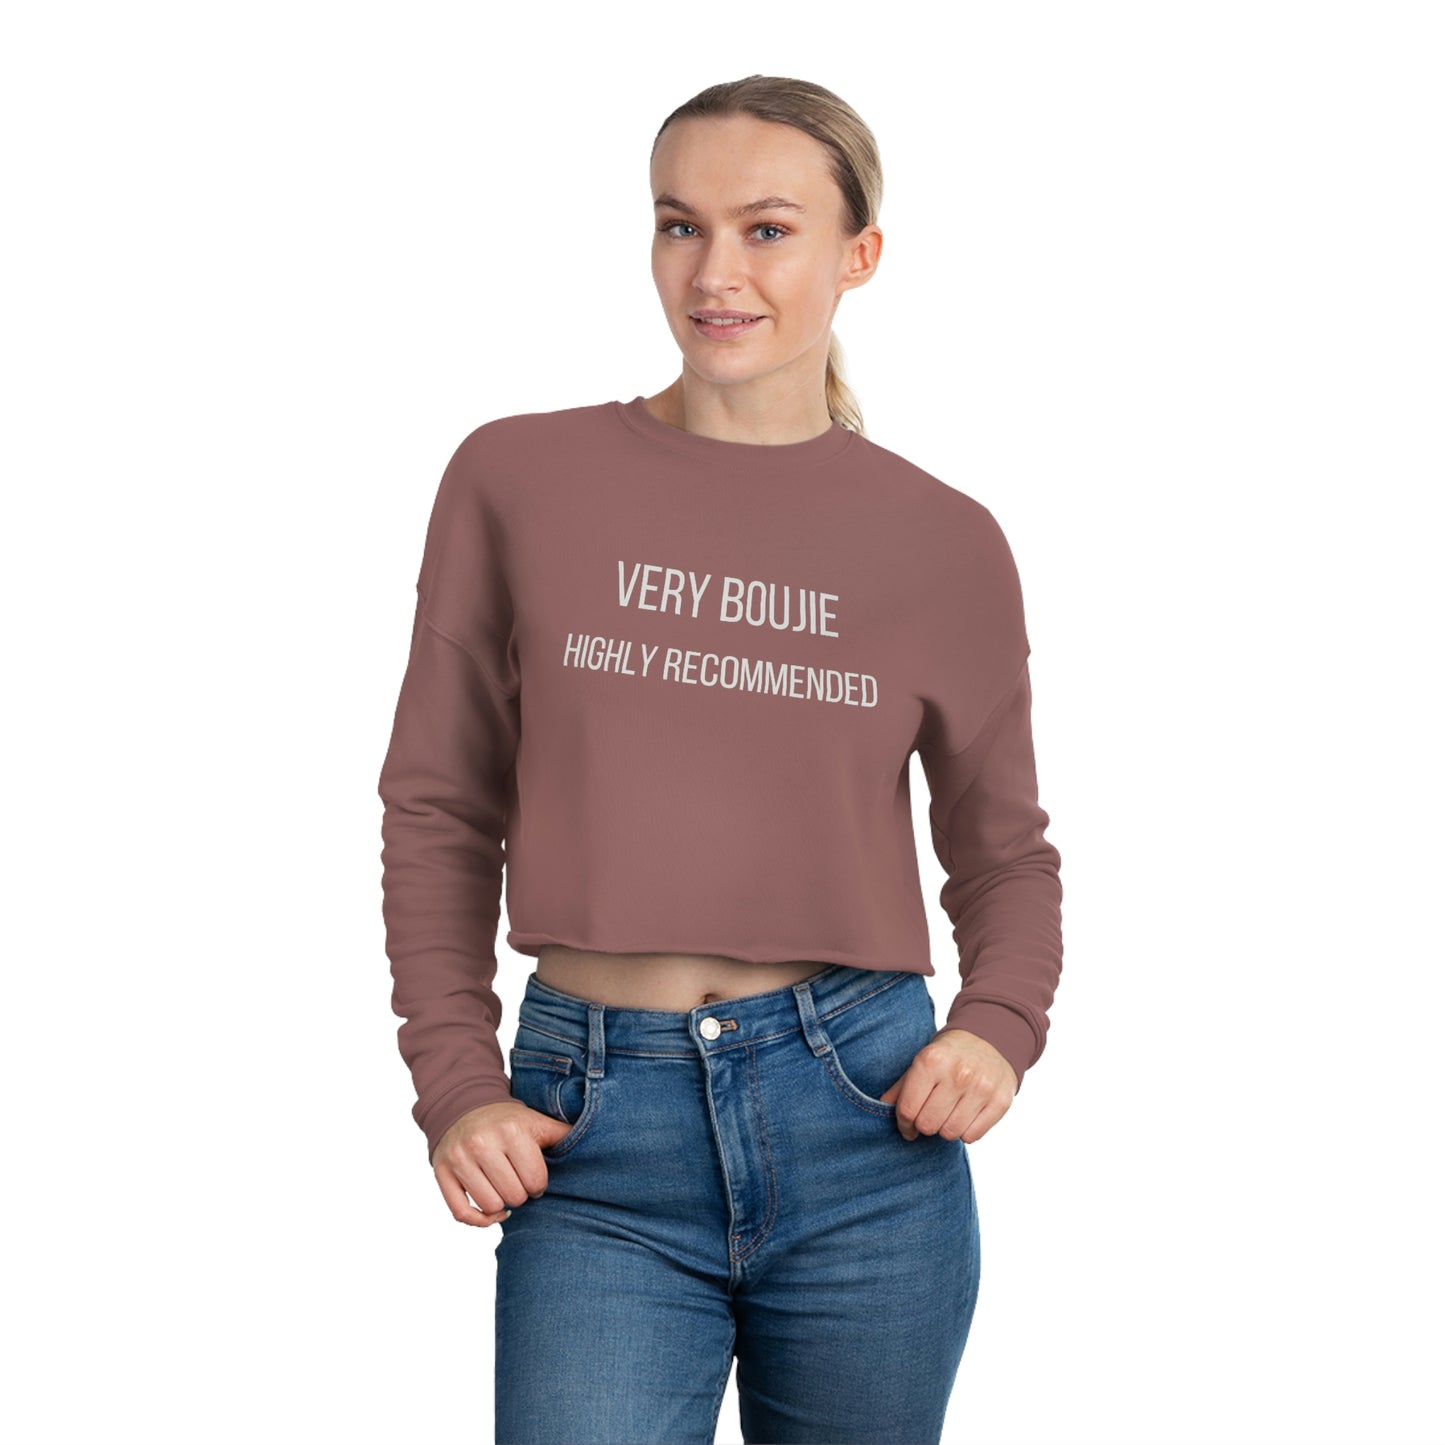 Very Bougie Highly Recommended Women's Cropped Sweatshirt - Arianna's Kloset